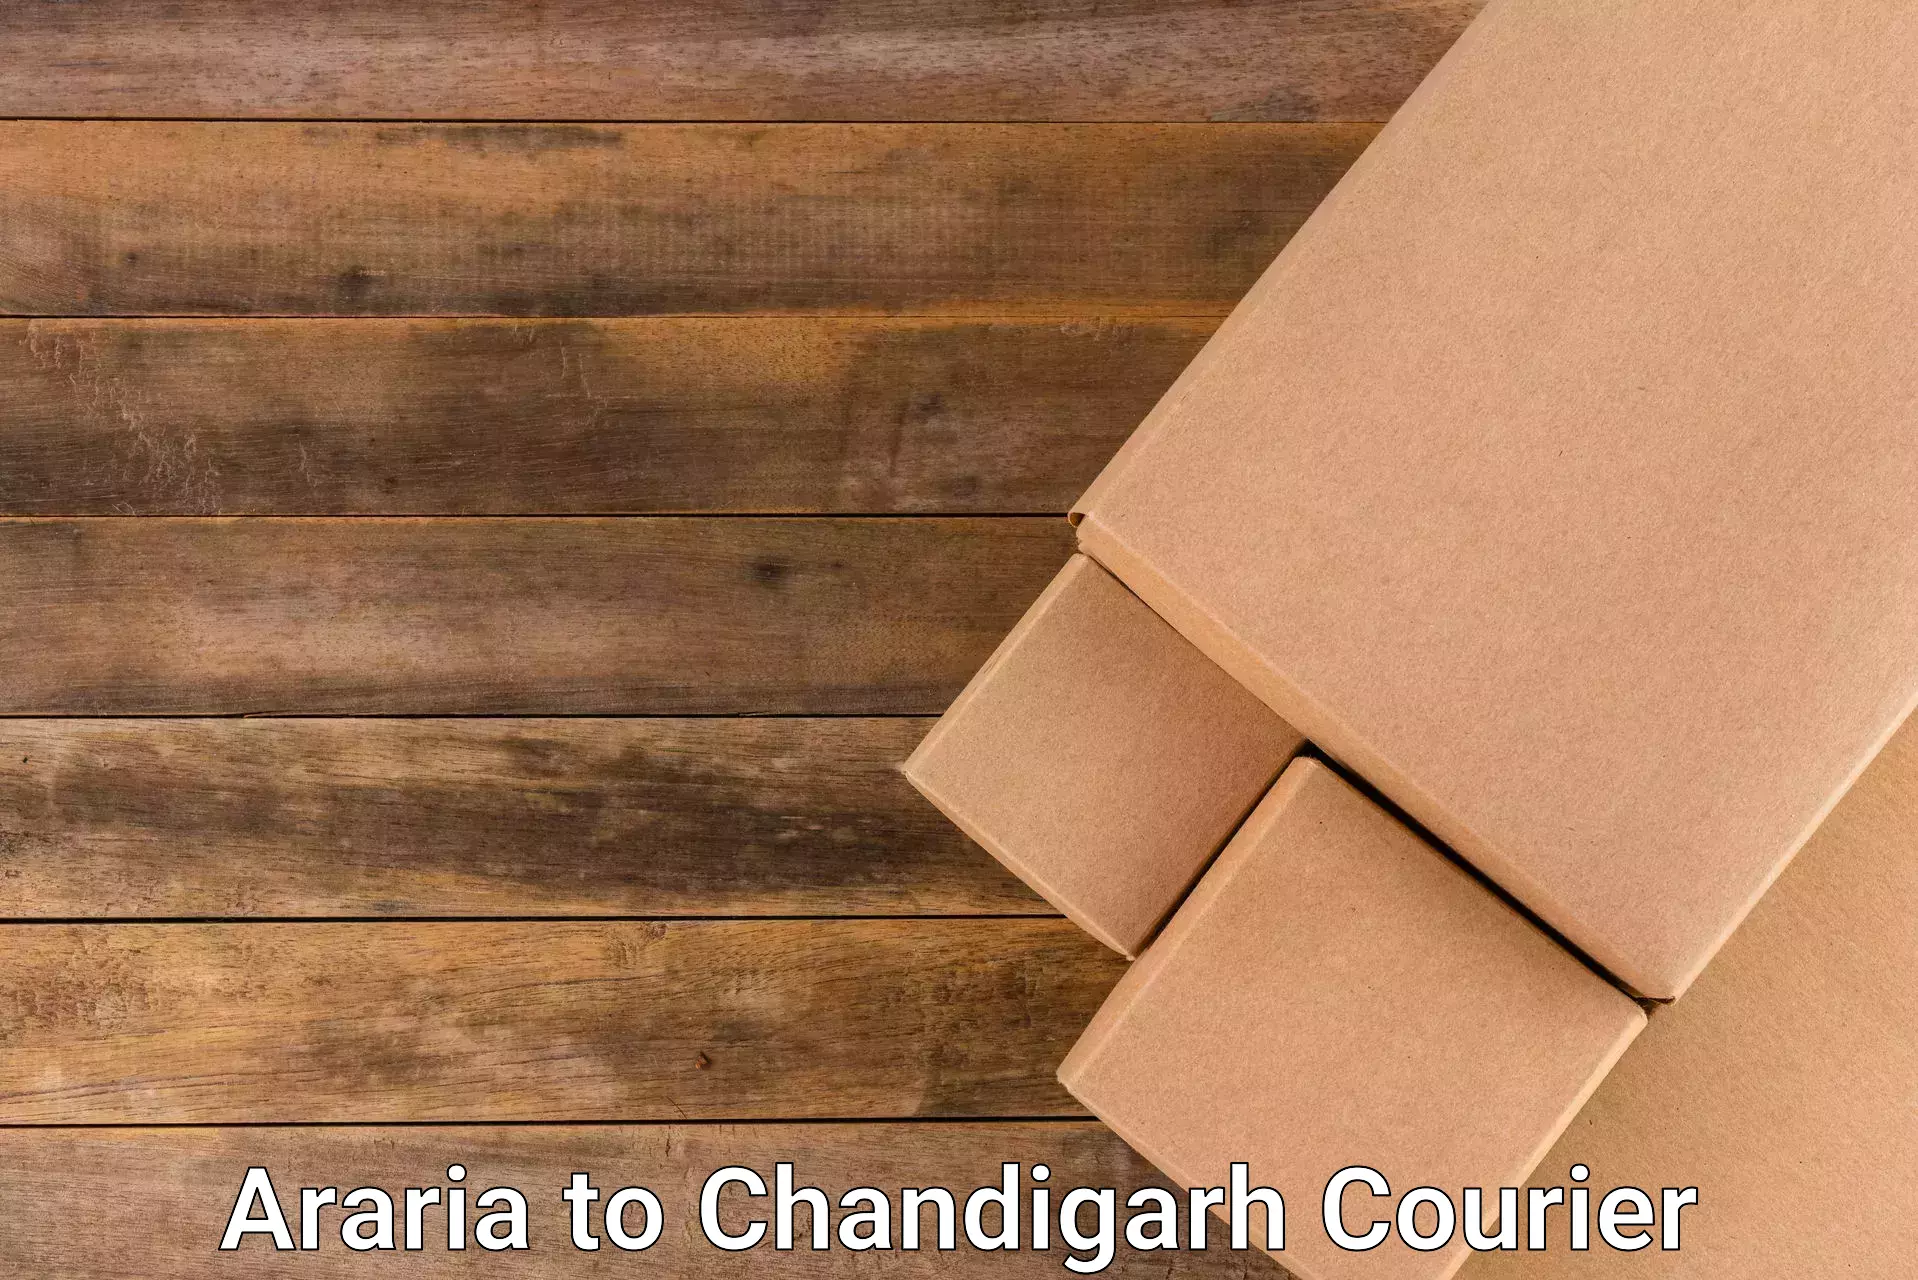 Budget-friendly shipping Araria to Chandigarh